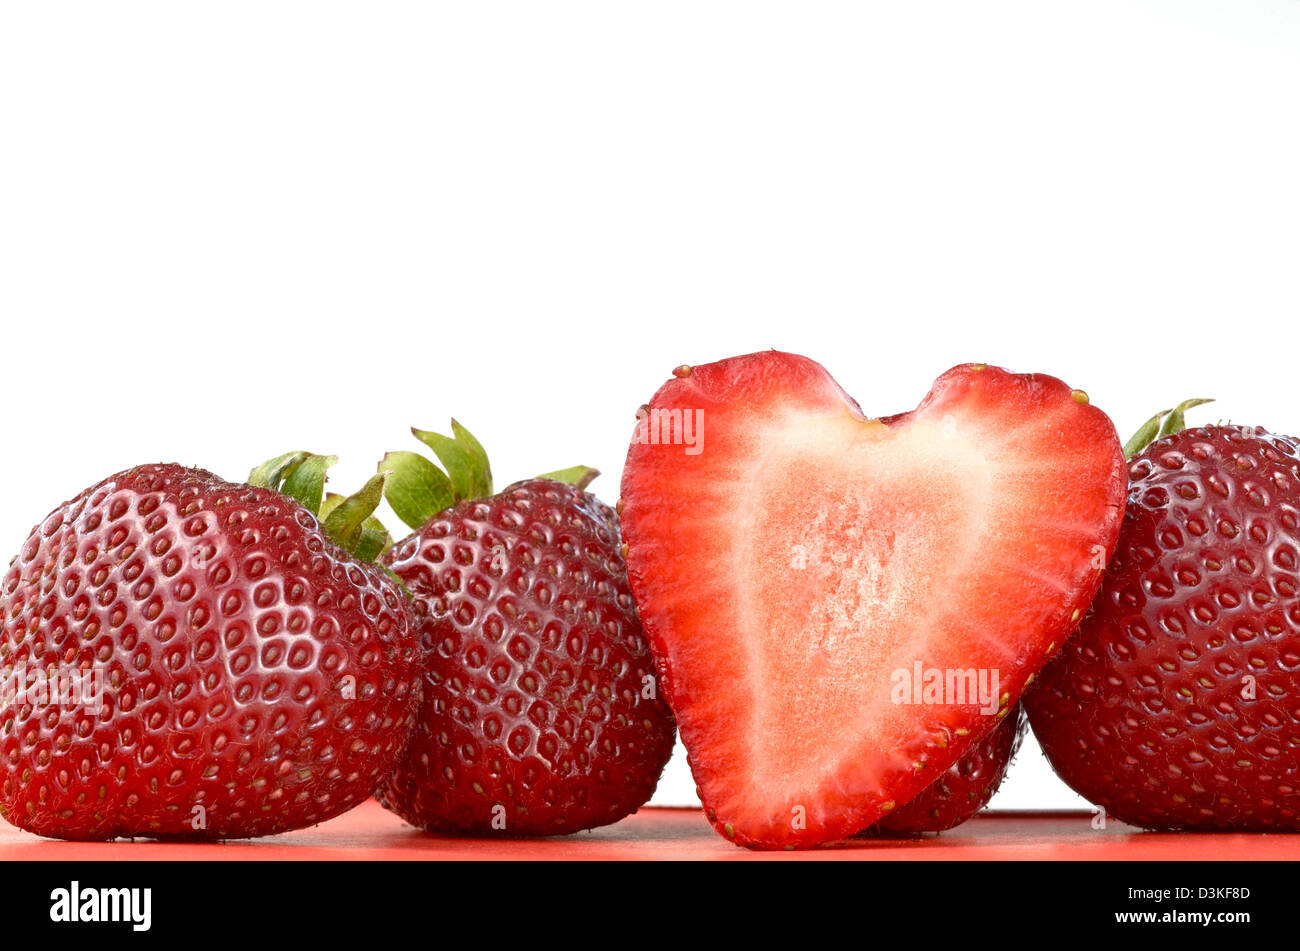 Four strawberries, one of them cut in half and having a heart-shape look. Stock Photo